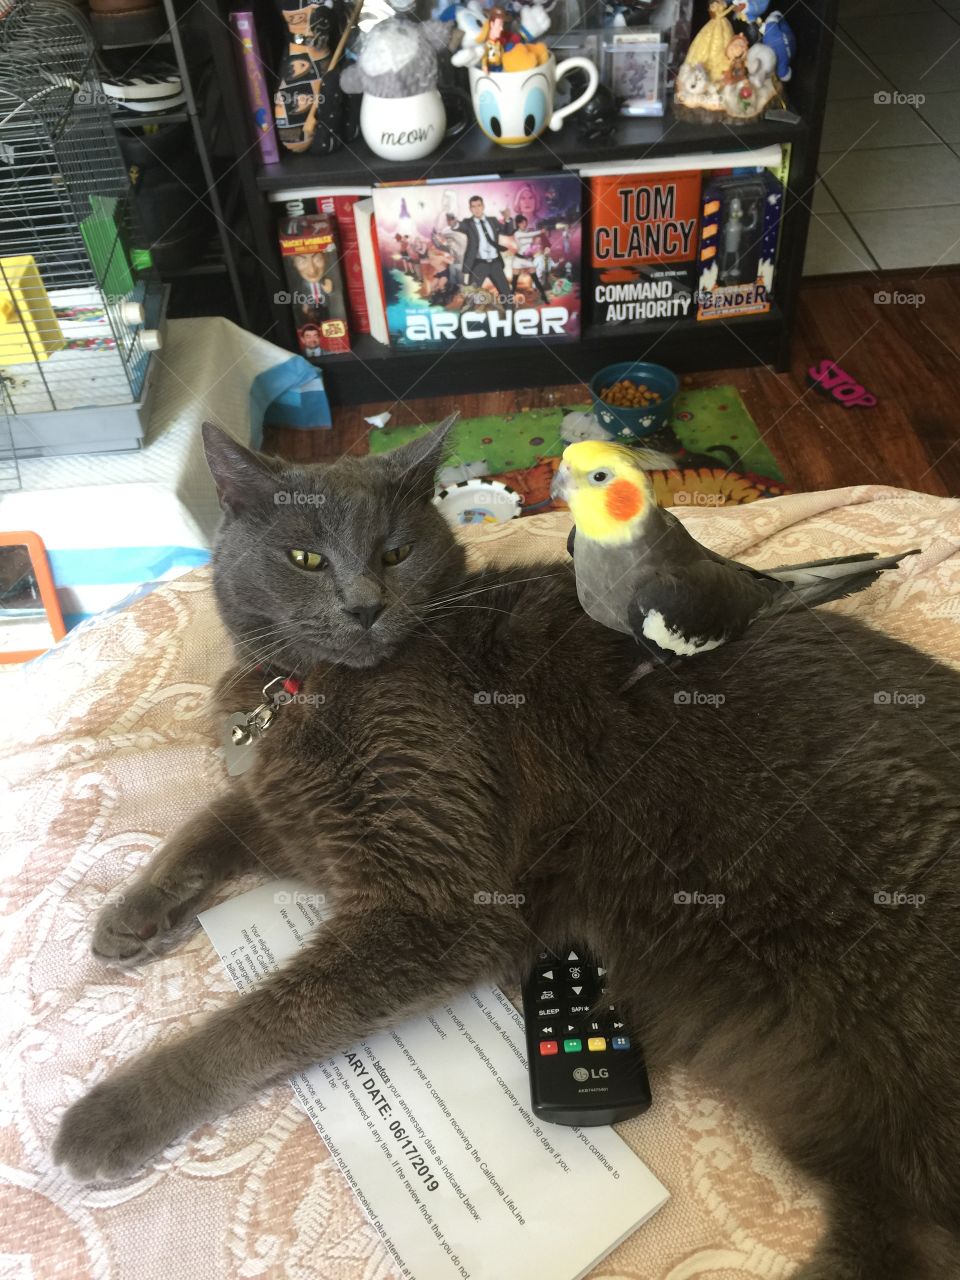 Who said cats and birds cannot be friends?